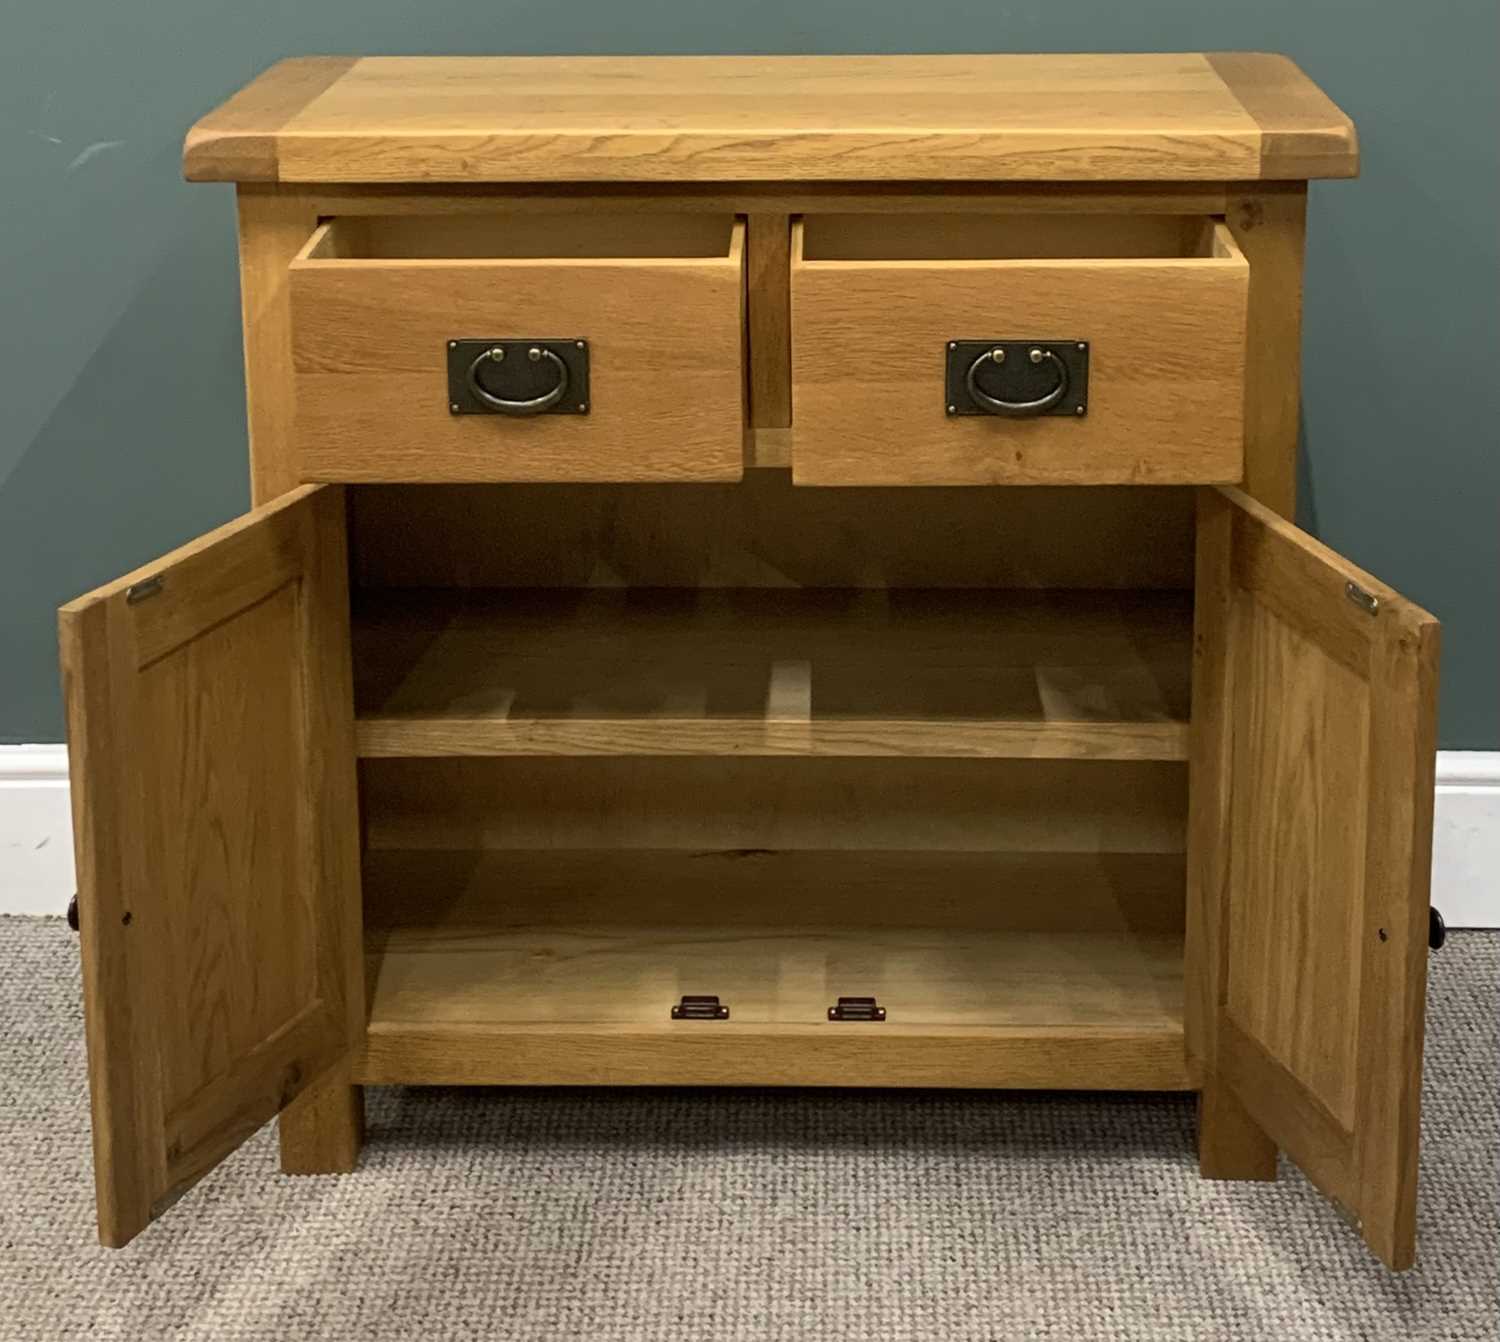 TWO ITEMS MODERN OAK FURNITURE, comprising two drawer, two door small sideboard, cleated end top, - Image 2 of 6